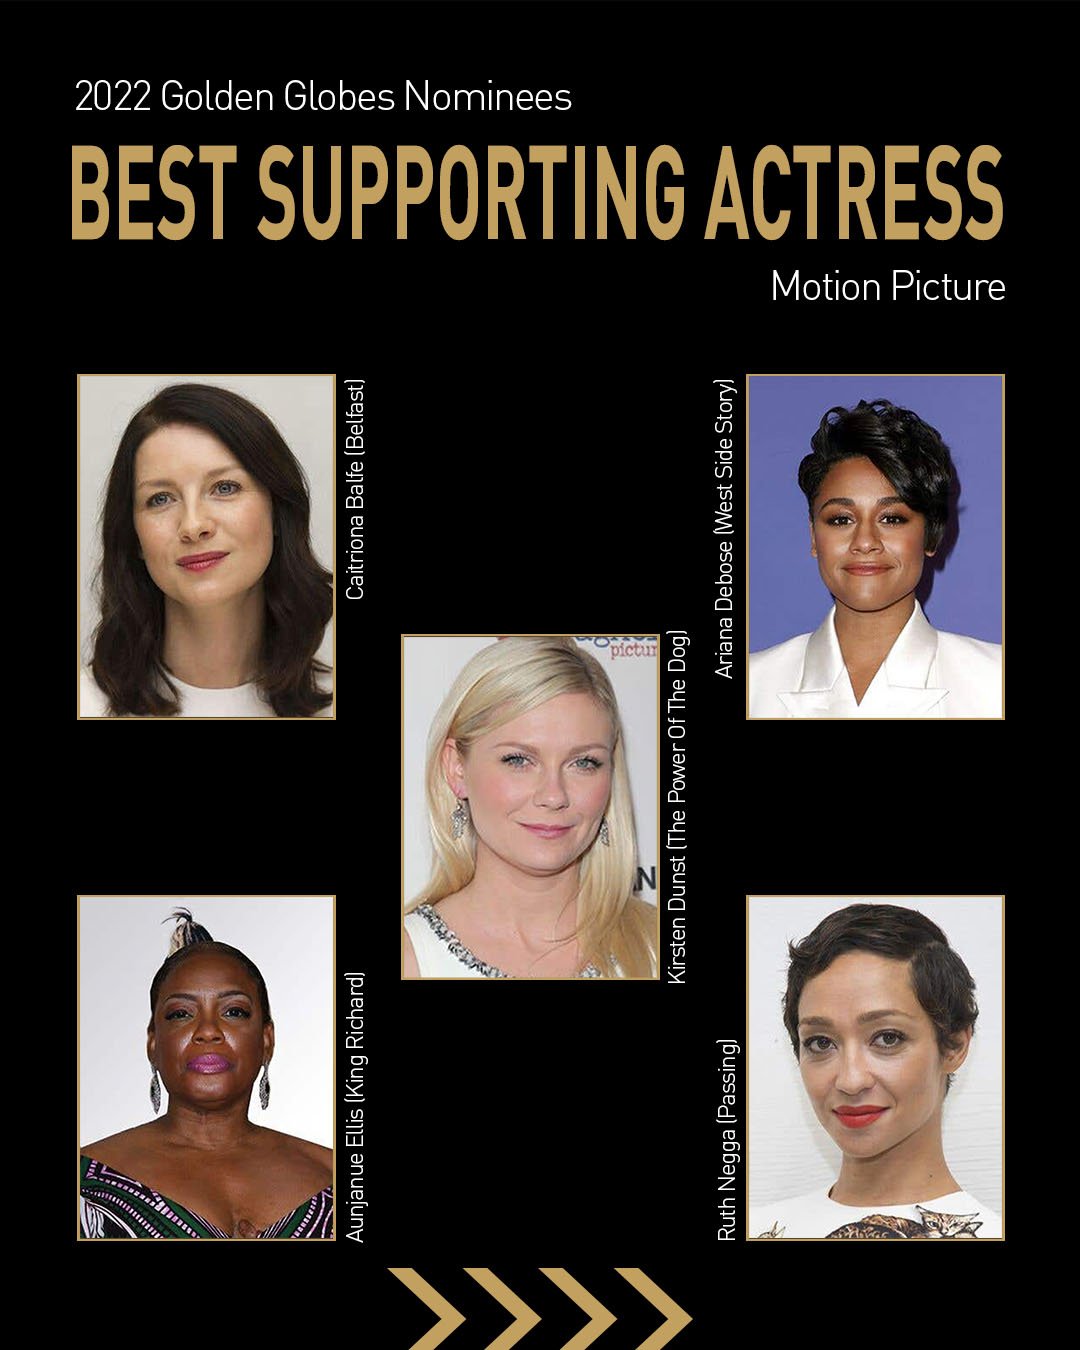 Nominations-IG Posts4B - Best Supporting Actress - Motion Picture.jpg